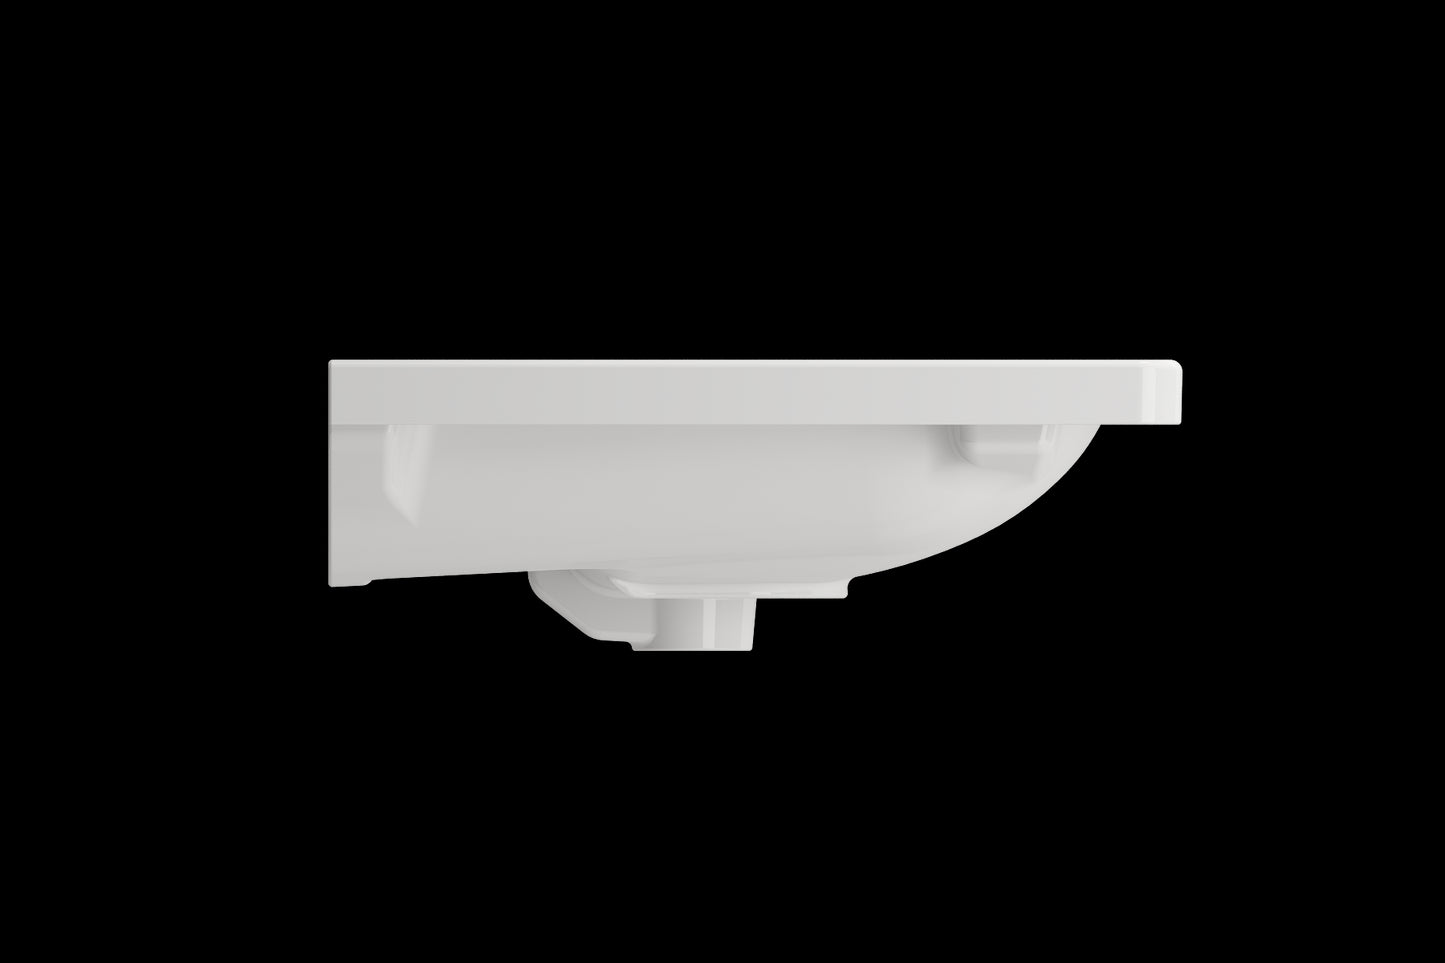 BOCCHI TAORMINA 33.75" Wall-Mounted Sink Basin Fireclay 1-Hole With Overflow